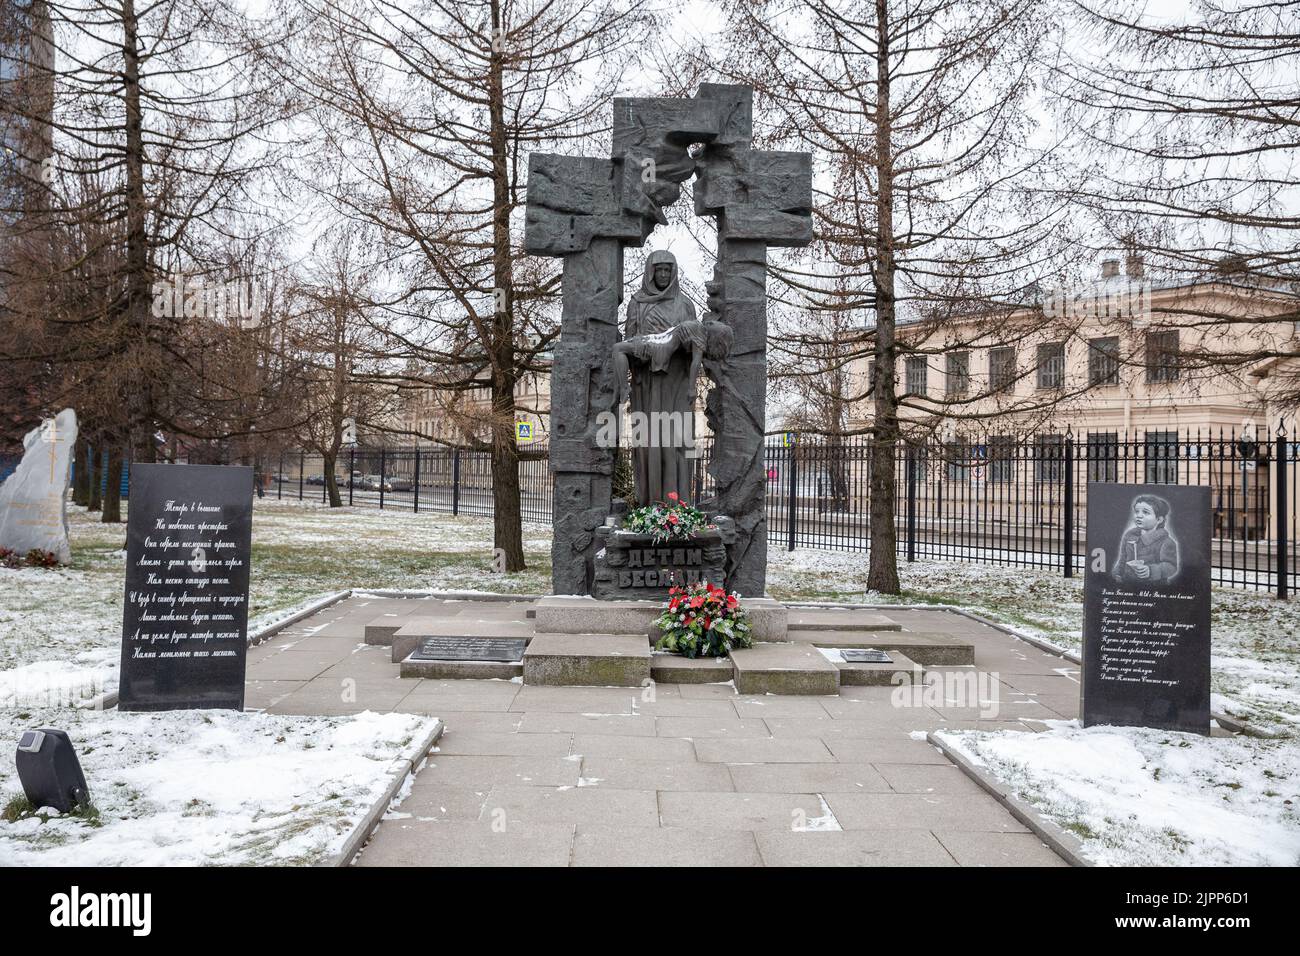 St. Petersburg, Russia - February 01, 2020: Monument to the children of Beslan near the Assumption Church in St. Petersburg Stock Photo